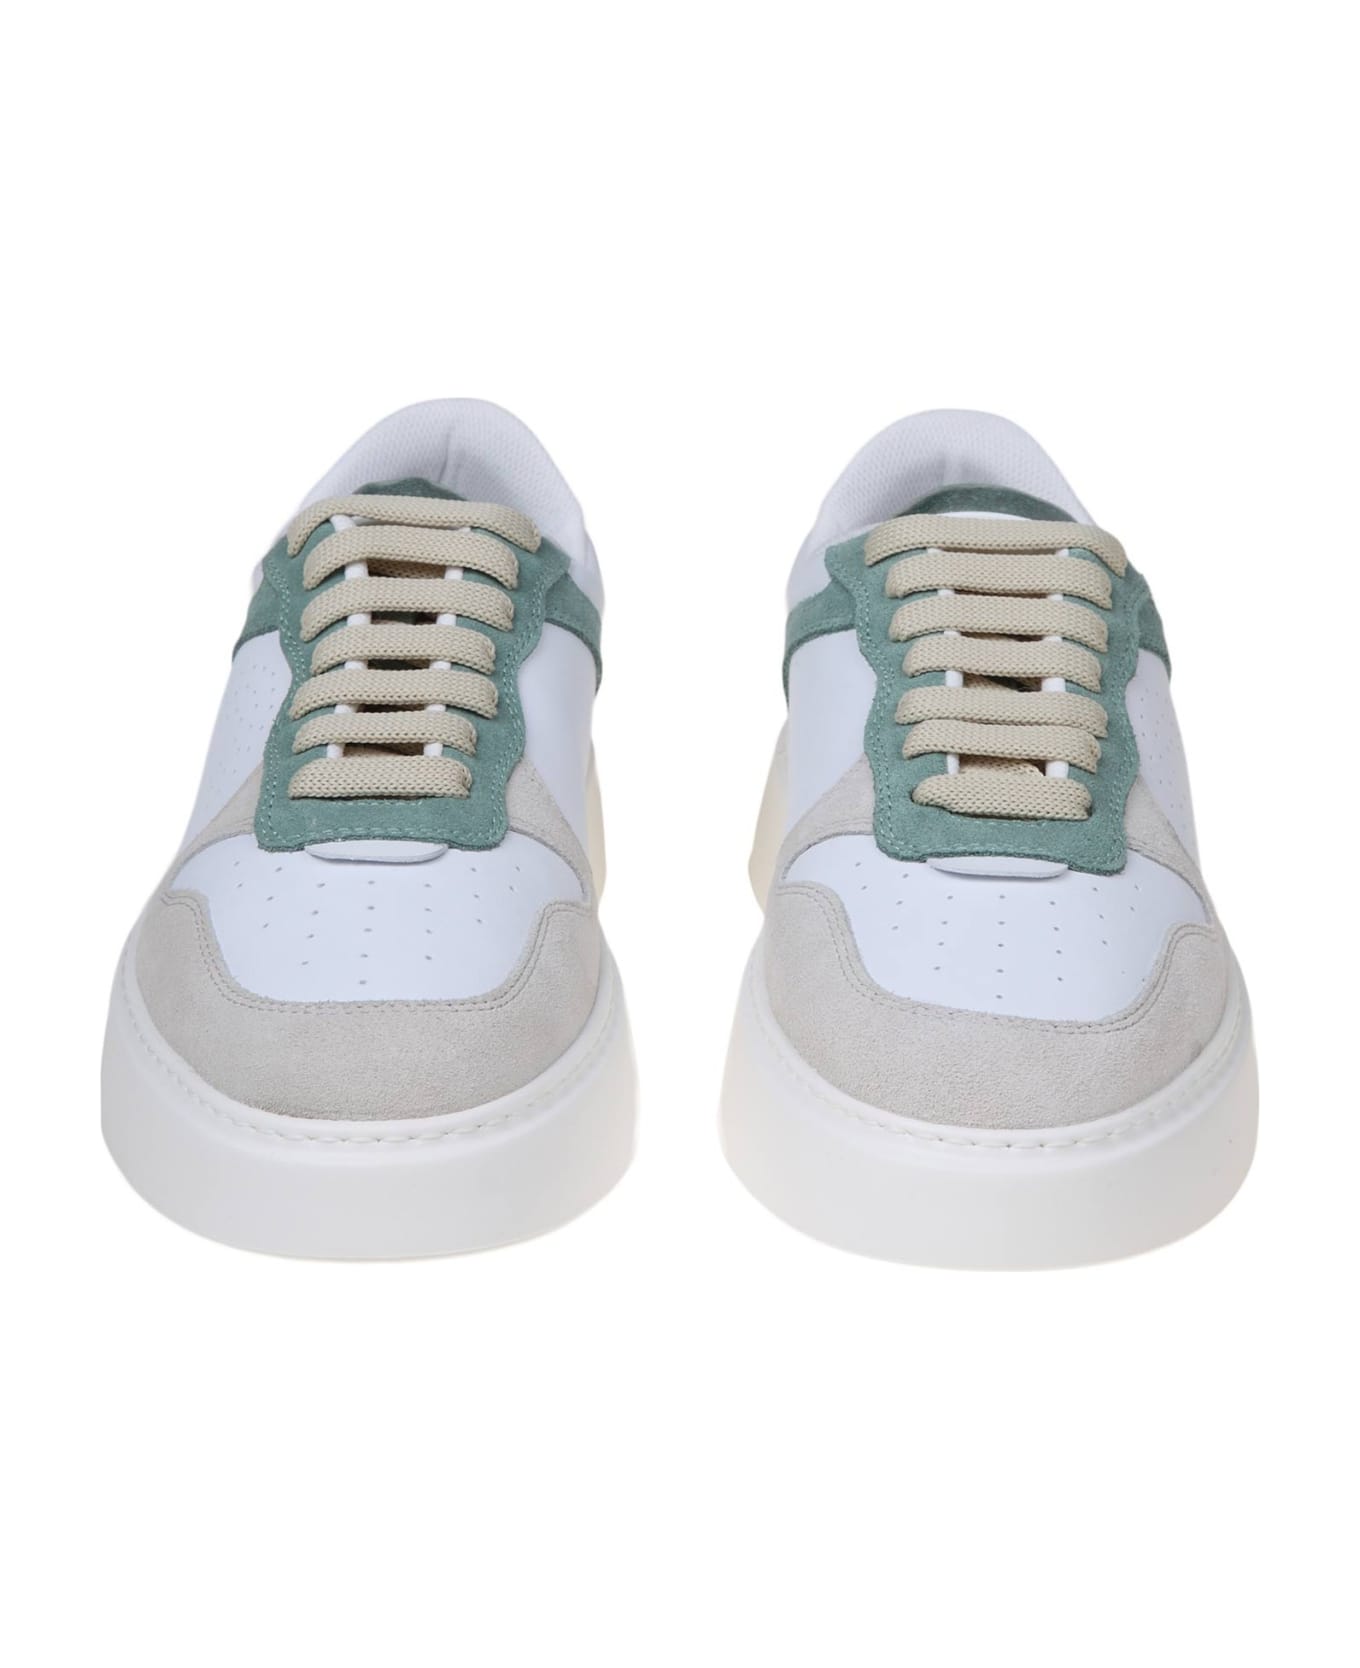 Furla Sneaker Basic Model In Multicolored Synthetic Leather - White